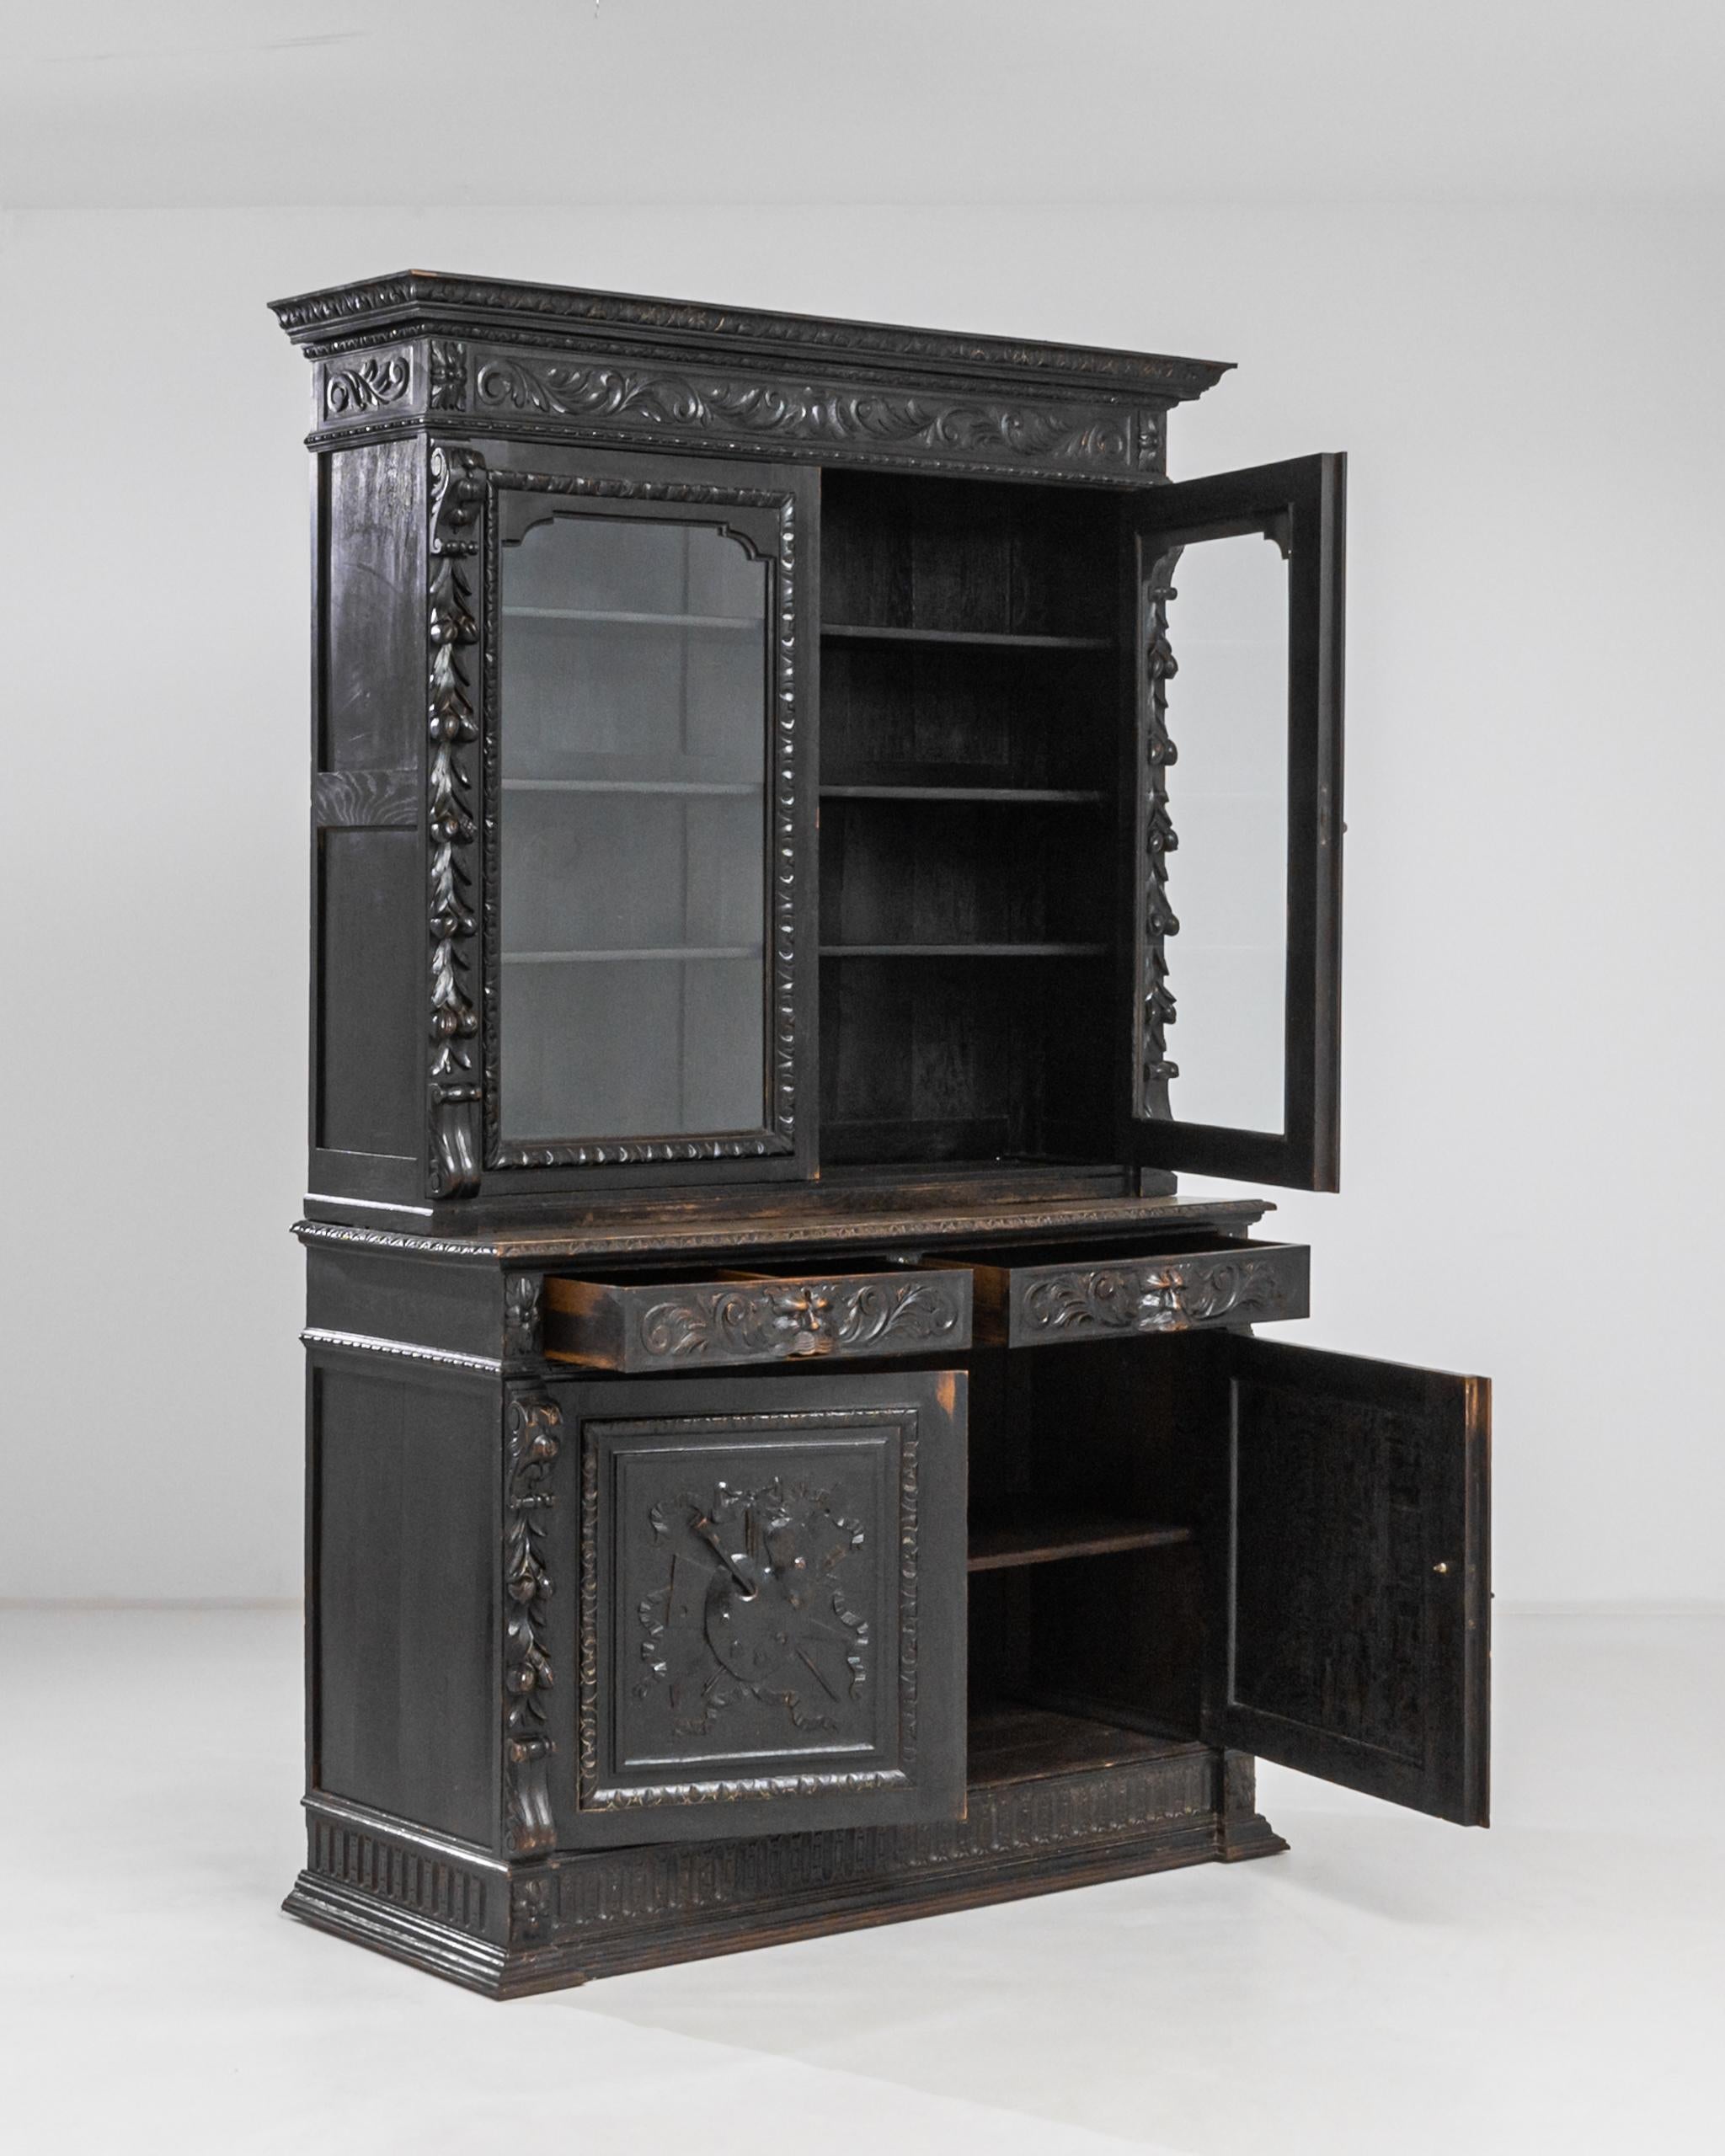 Elaborate Neo-Renaissance carvings and the deep black finish of the wood lend this antique vitrine a powerful presence. Made in 1880s France, a pair of paned windows are framed by carved festoons of leaves, fruit and scrolling acanthuses.